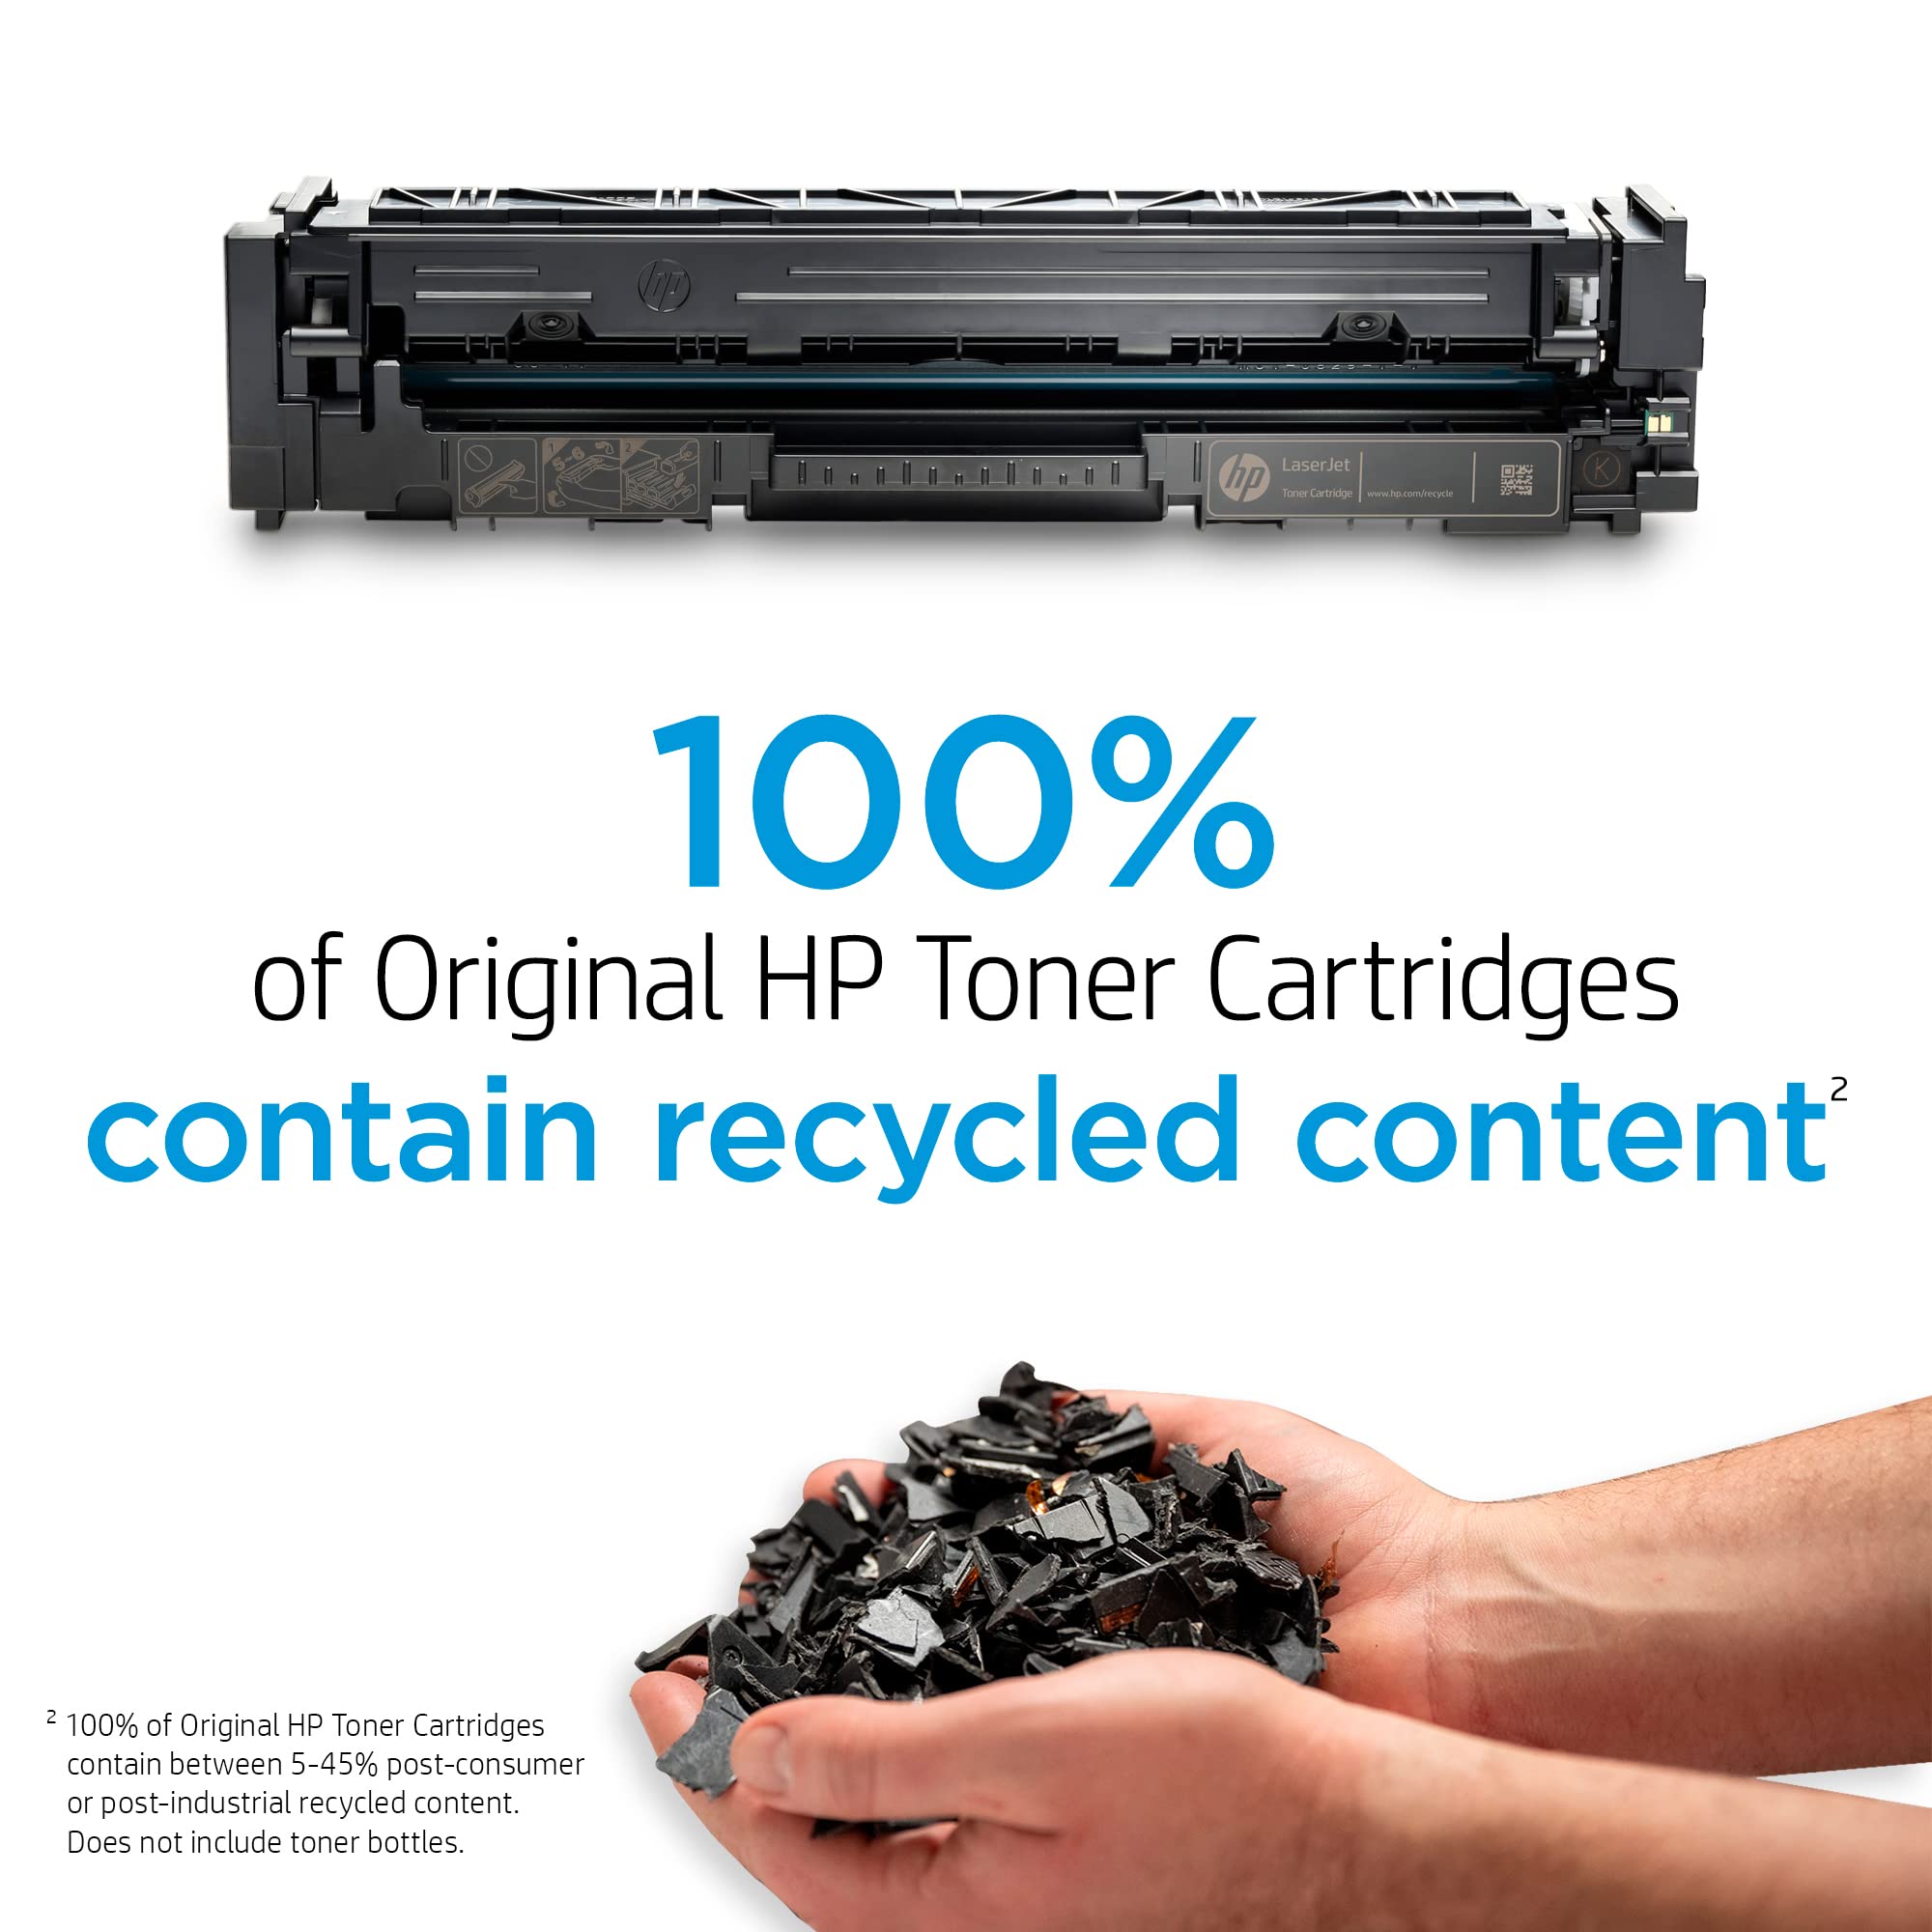 HP 206A Black Toner Cartridge | Works with HP Color LaserJet Pro M255, HP Color LaserJet Pro MFP M282, M283 Series | W2110A